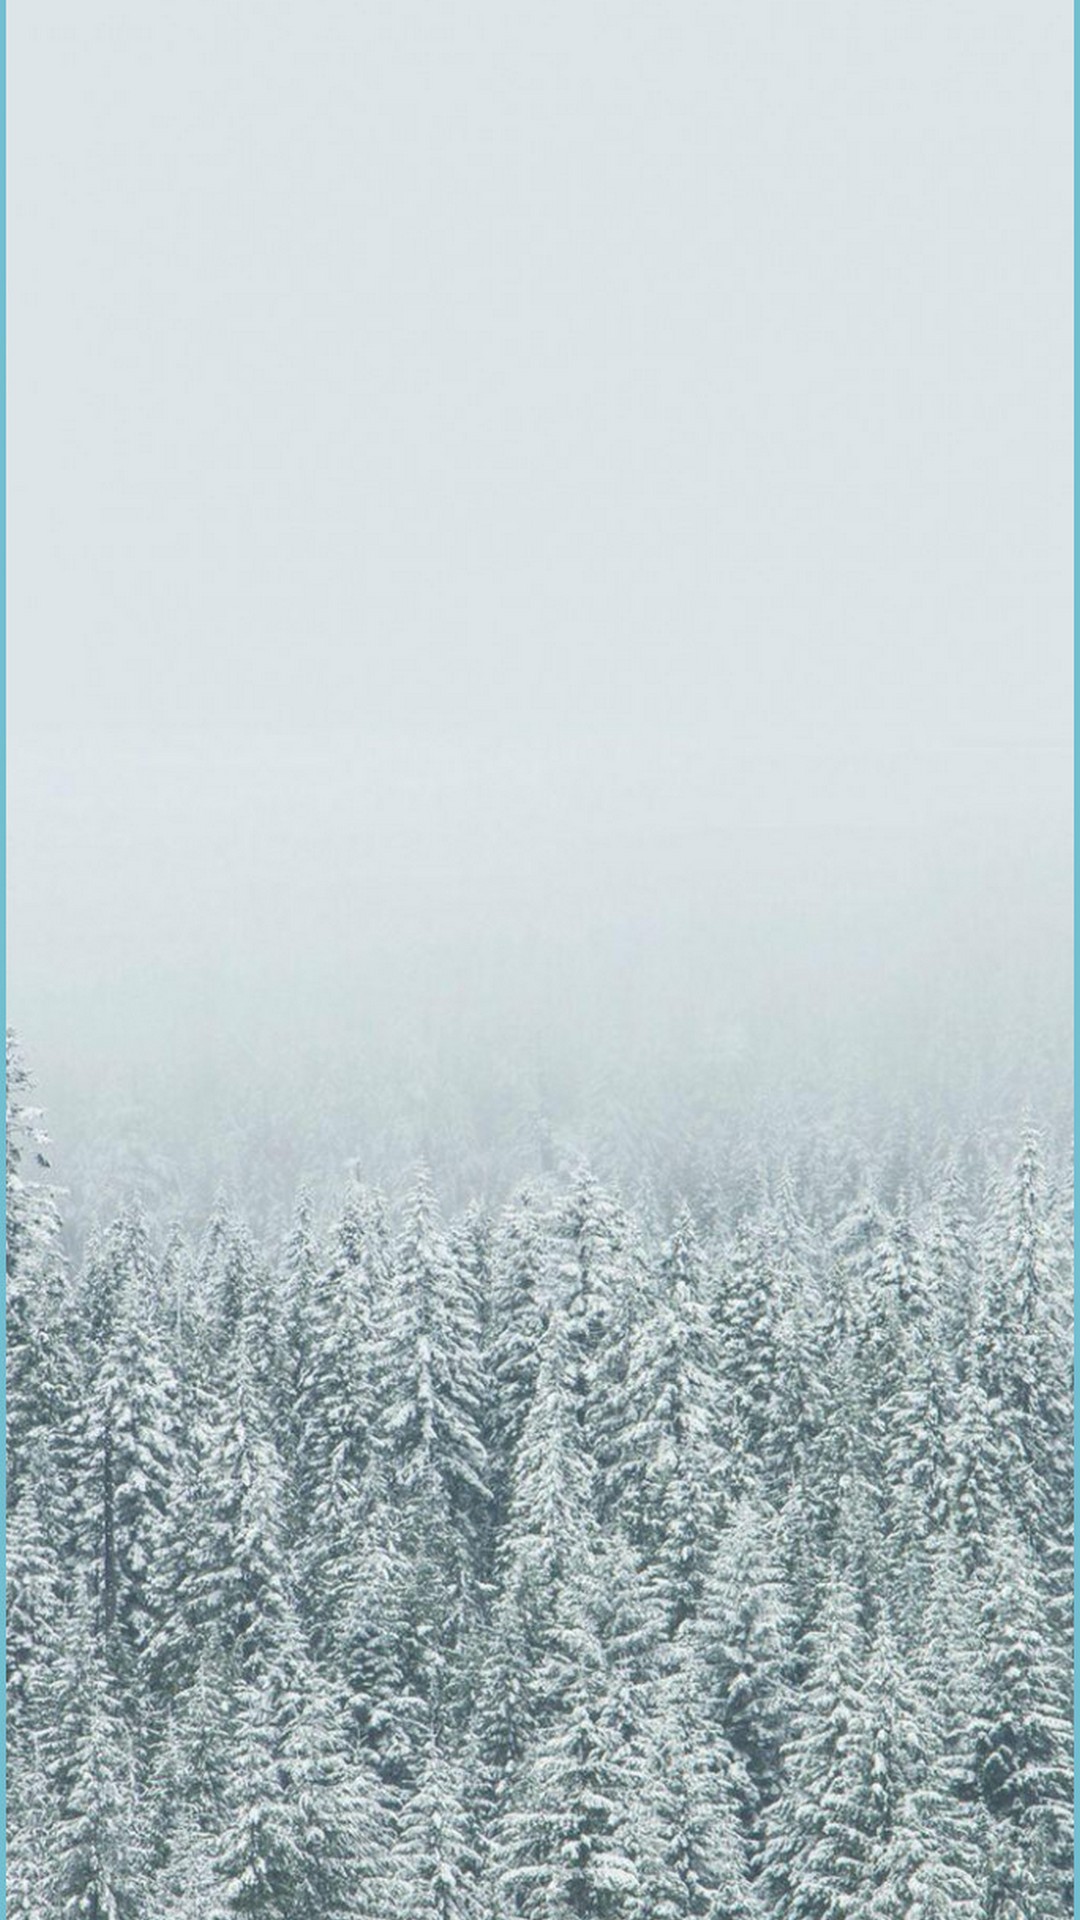 Winter Aesthetic iPhone Wallpaper With high-resolution 1080X1920 pixel. You can use this wallpaper for your iPhone 5, 6, 7, 8, X, XS, XR backgrounds, Mobile Screensaver, or iPad Lock Screen